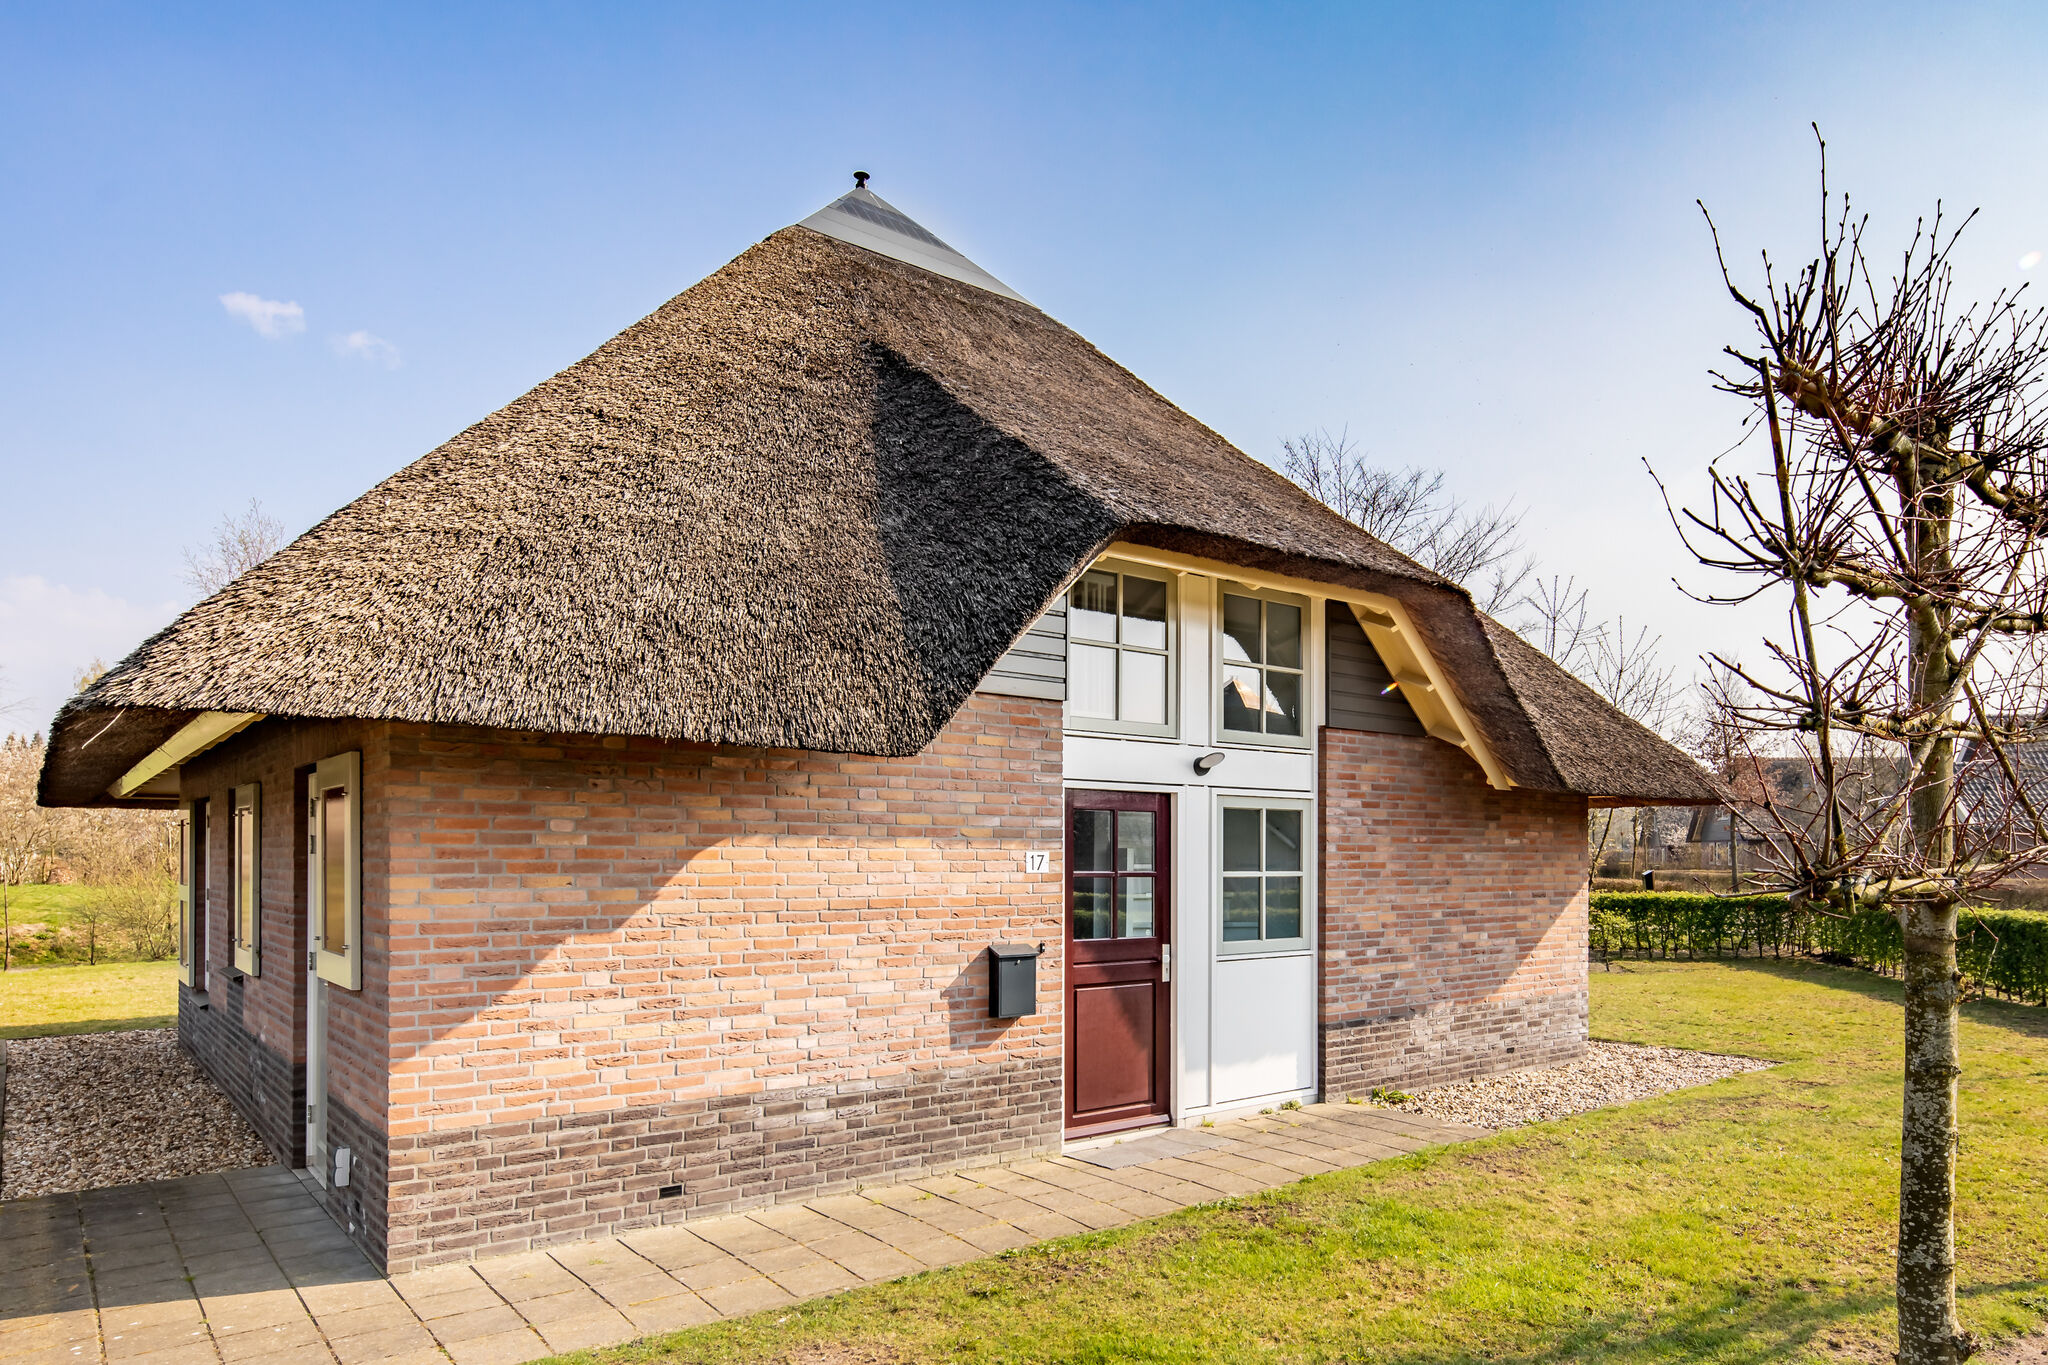 Thatched villa with dishwasher, 2 km. from Appelscha